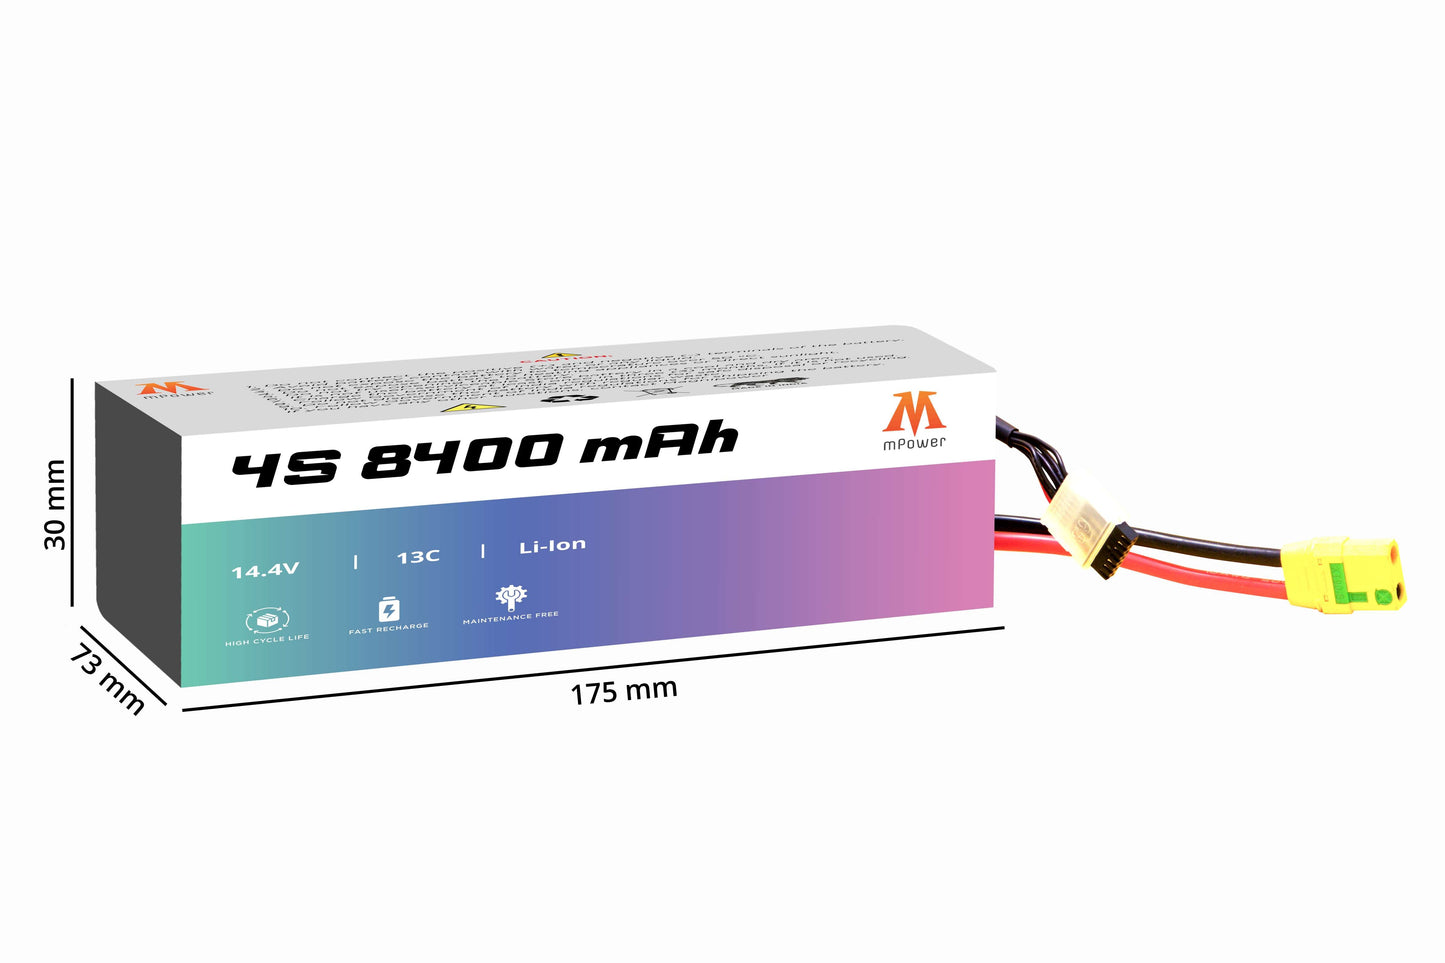 mPower 4S 8400mAh 13C Lithium-Ion Battery for Surveillance Drones